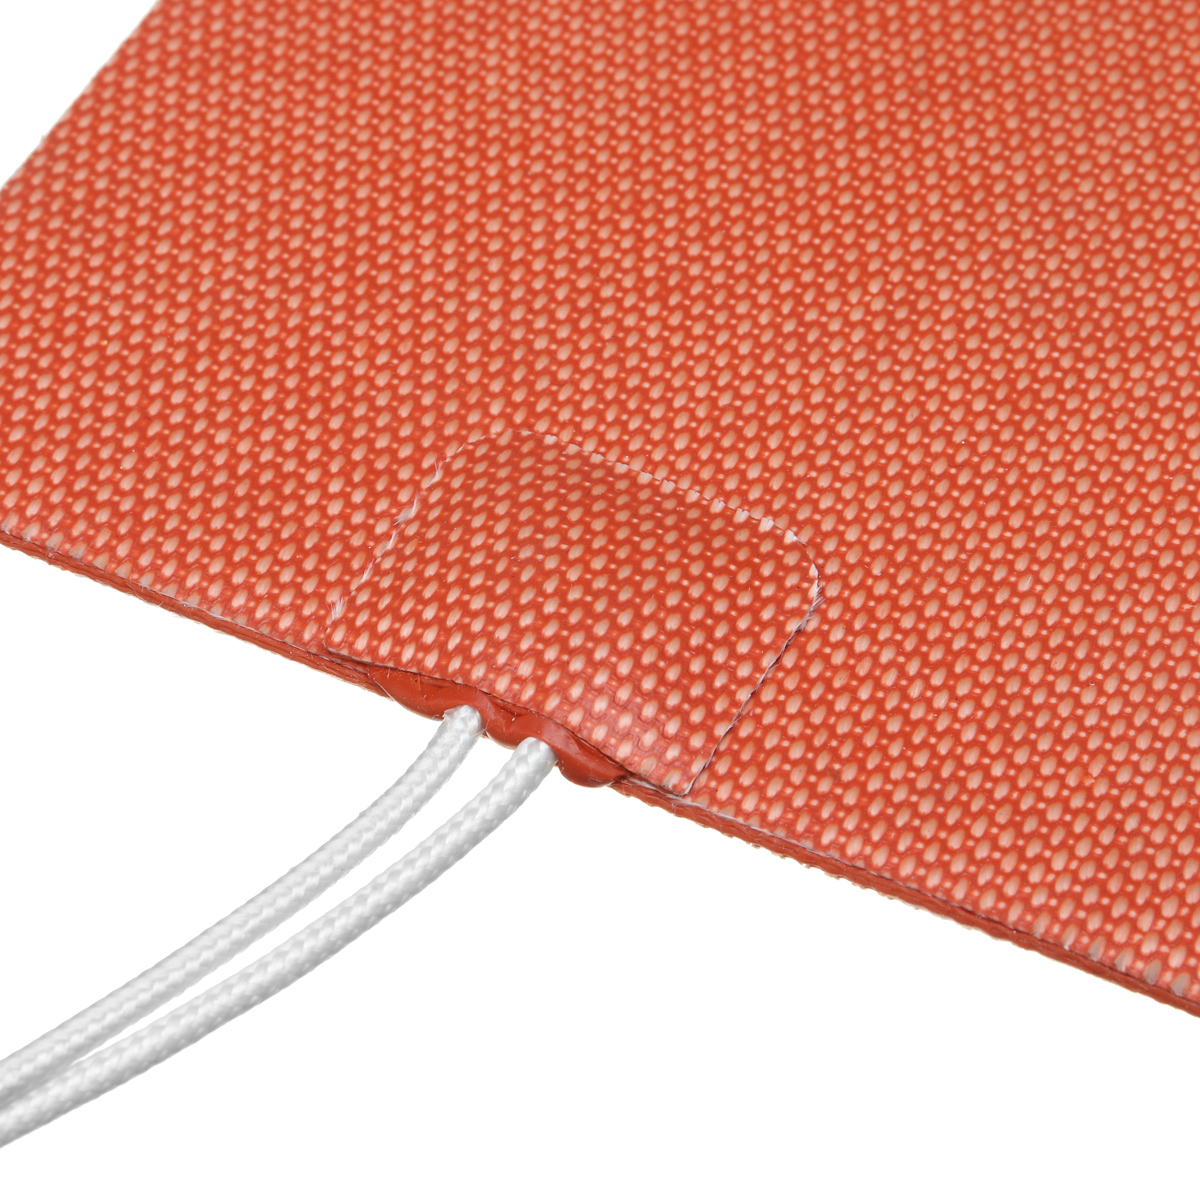 300W 240V 10*15cm Silicone Heated Bed Heating Pad w/ Adhesive Backing for 3D Printer Hot Bed